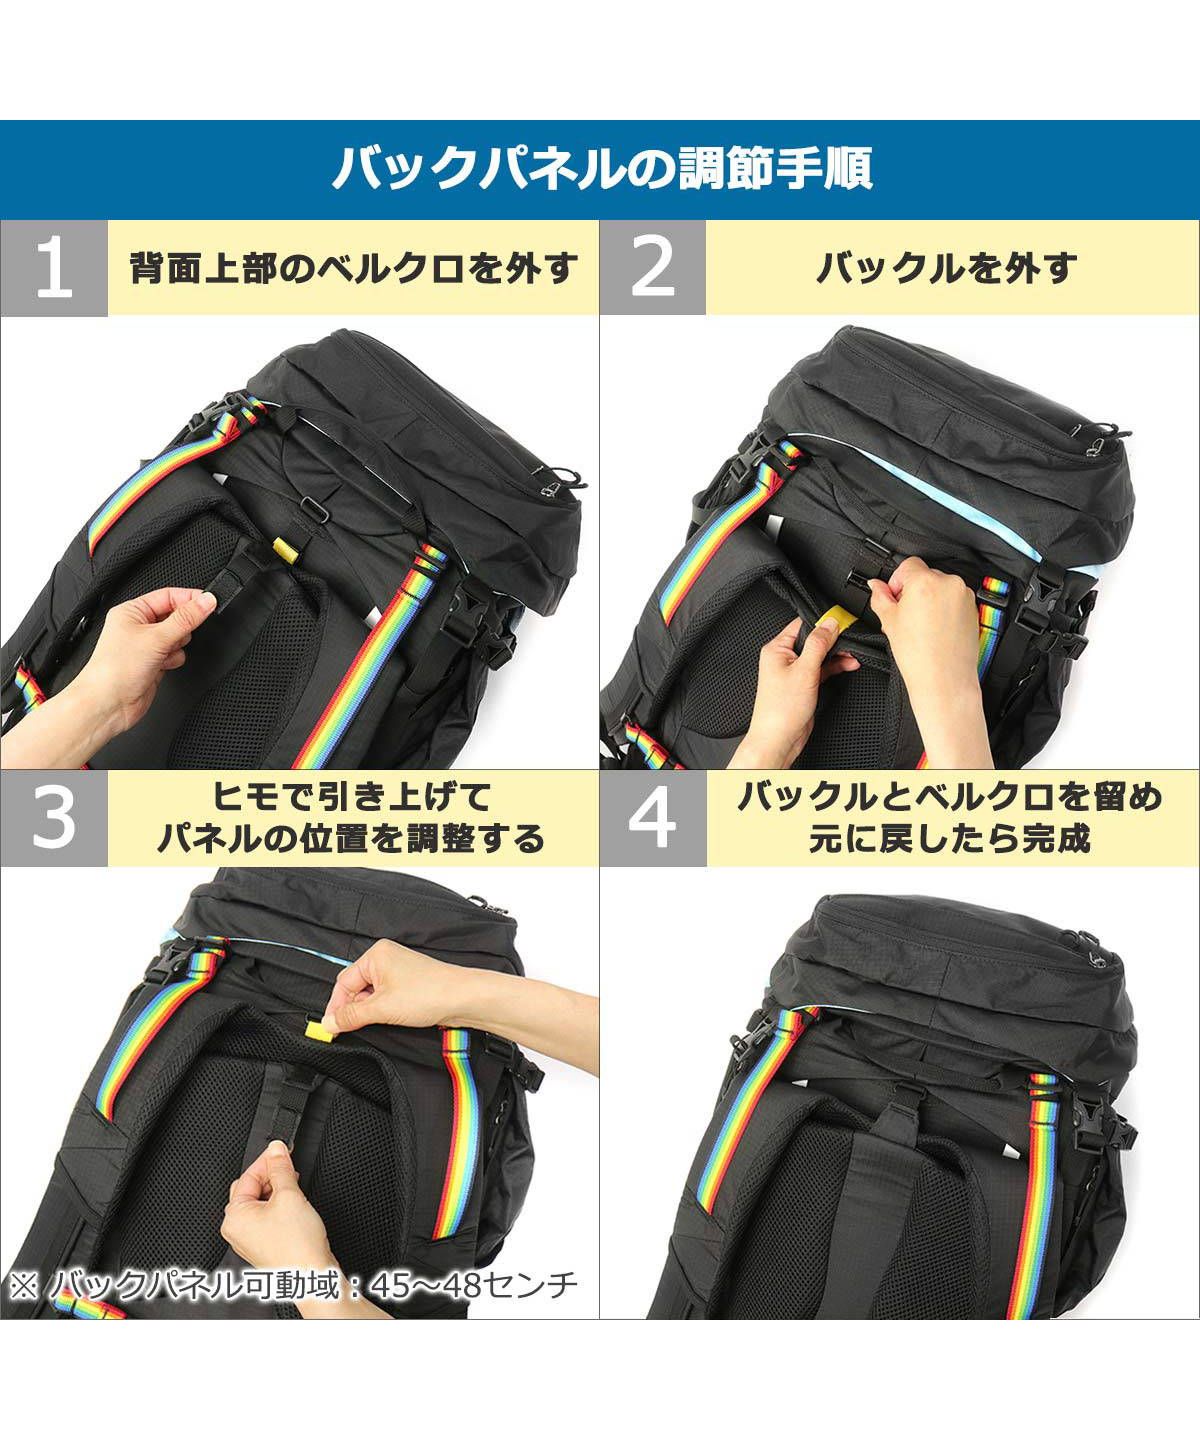 CHUMS 35L バックパック（黒/虹色）